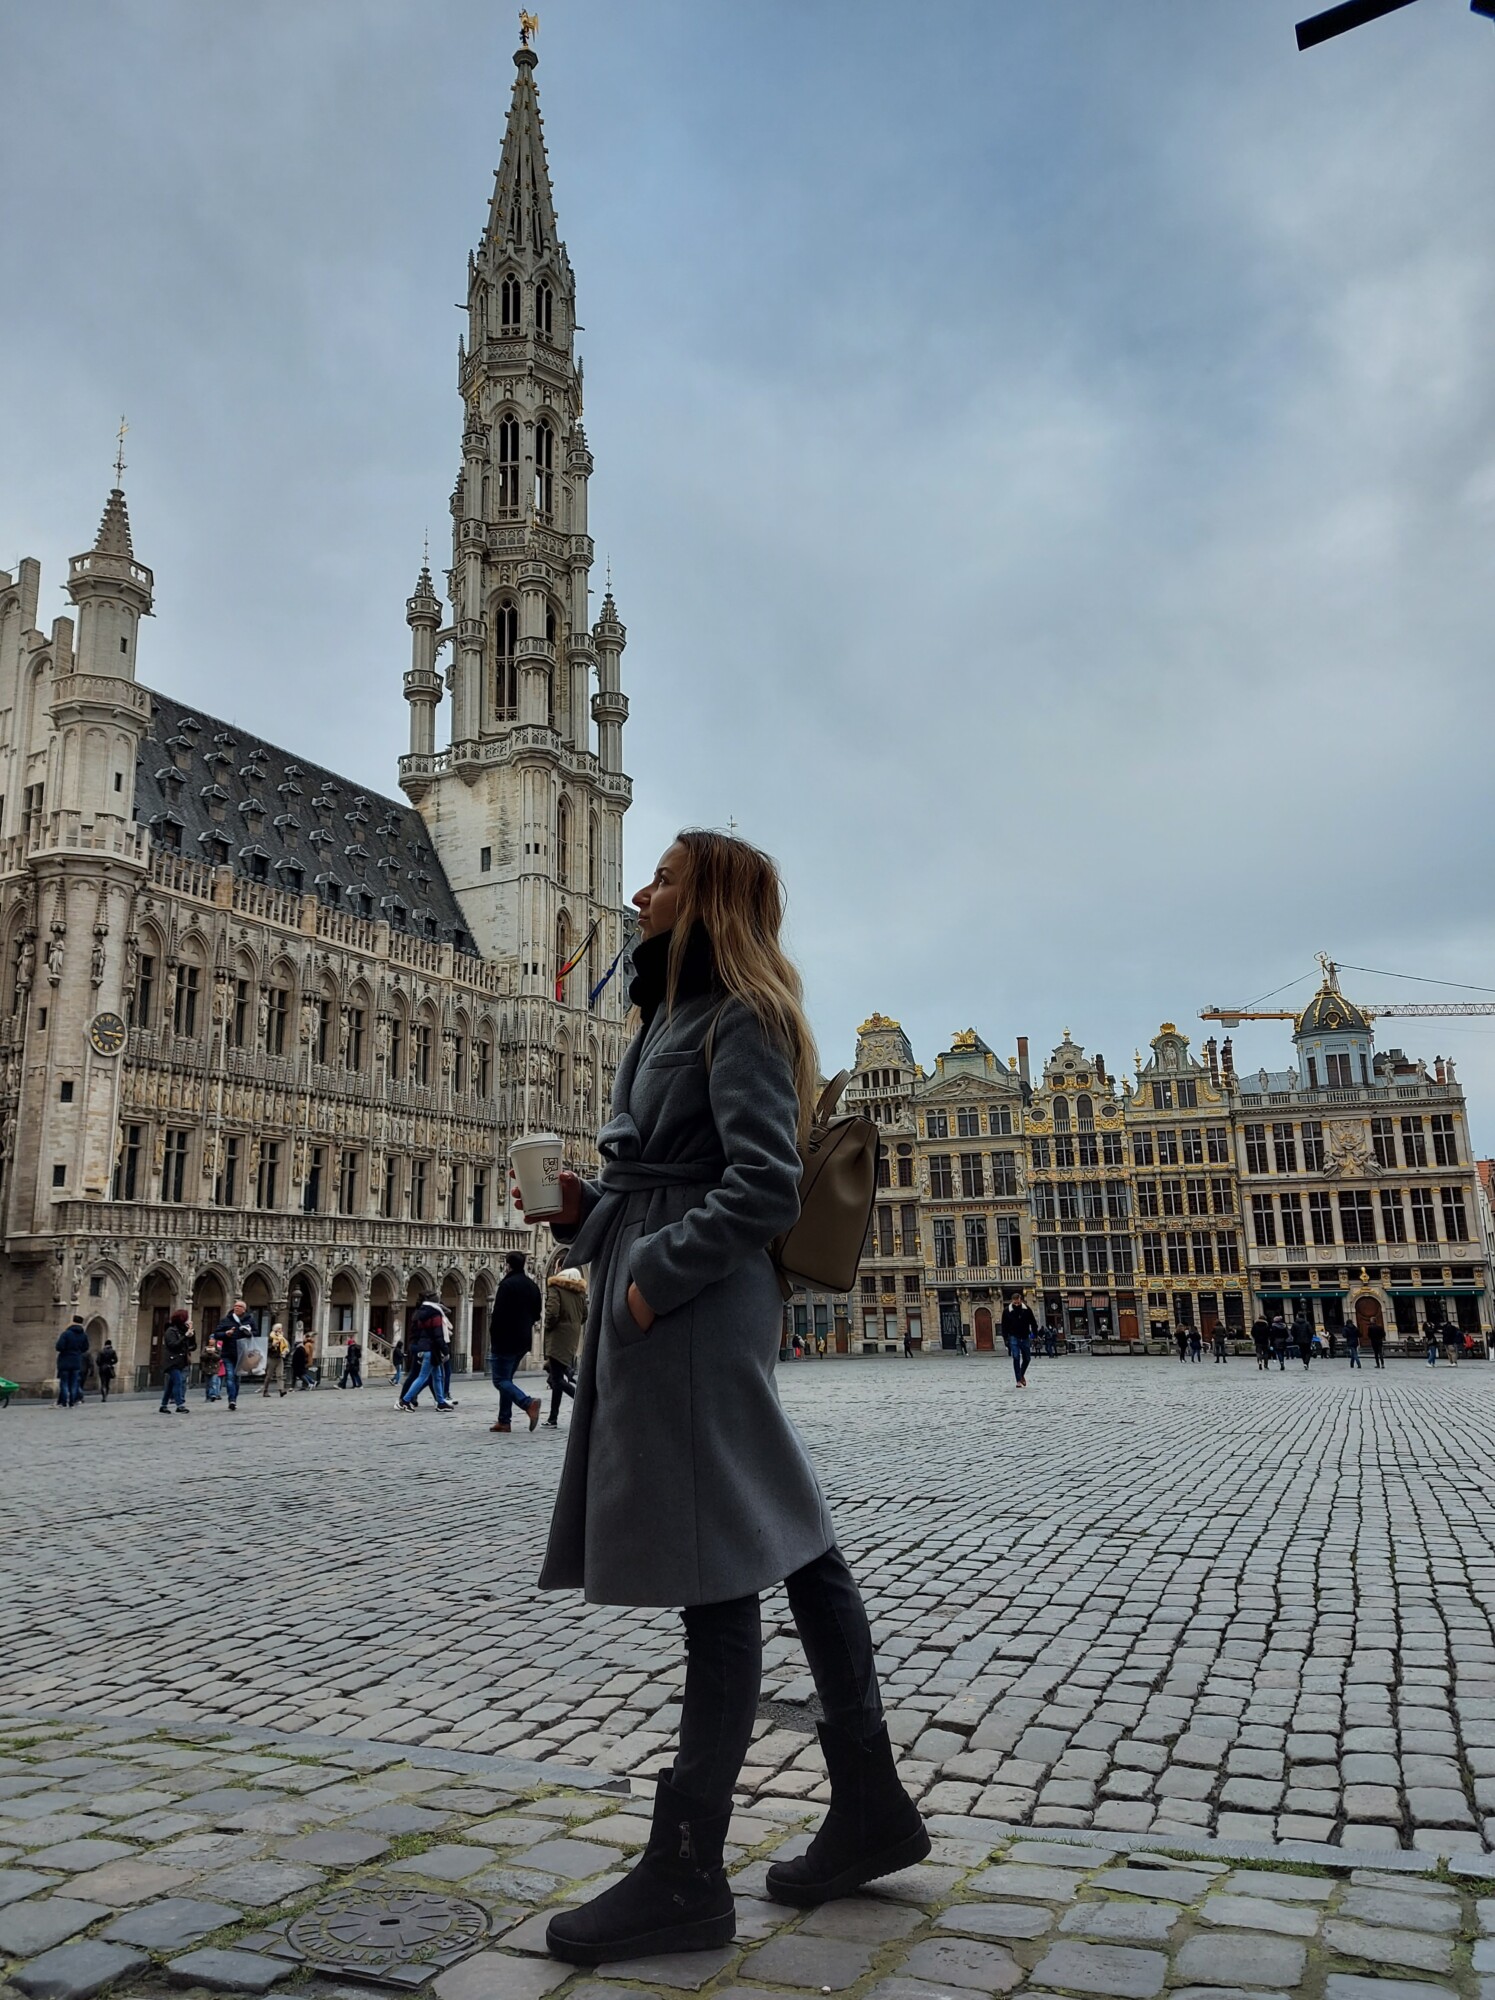 A big Place and the town hall of Brussels, Belgium.